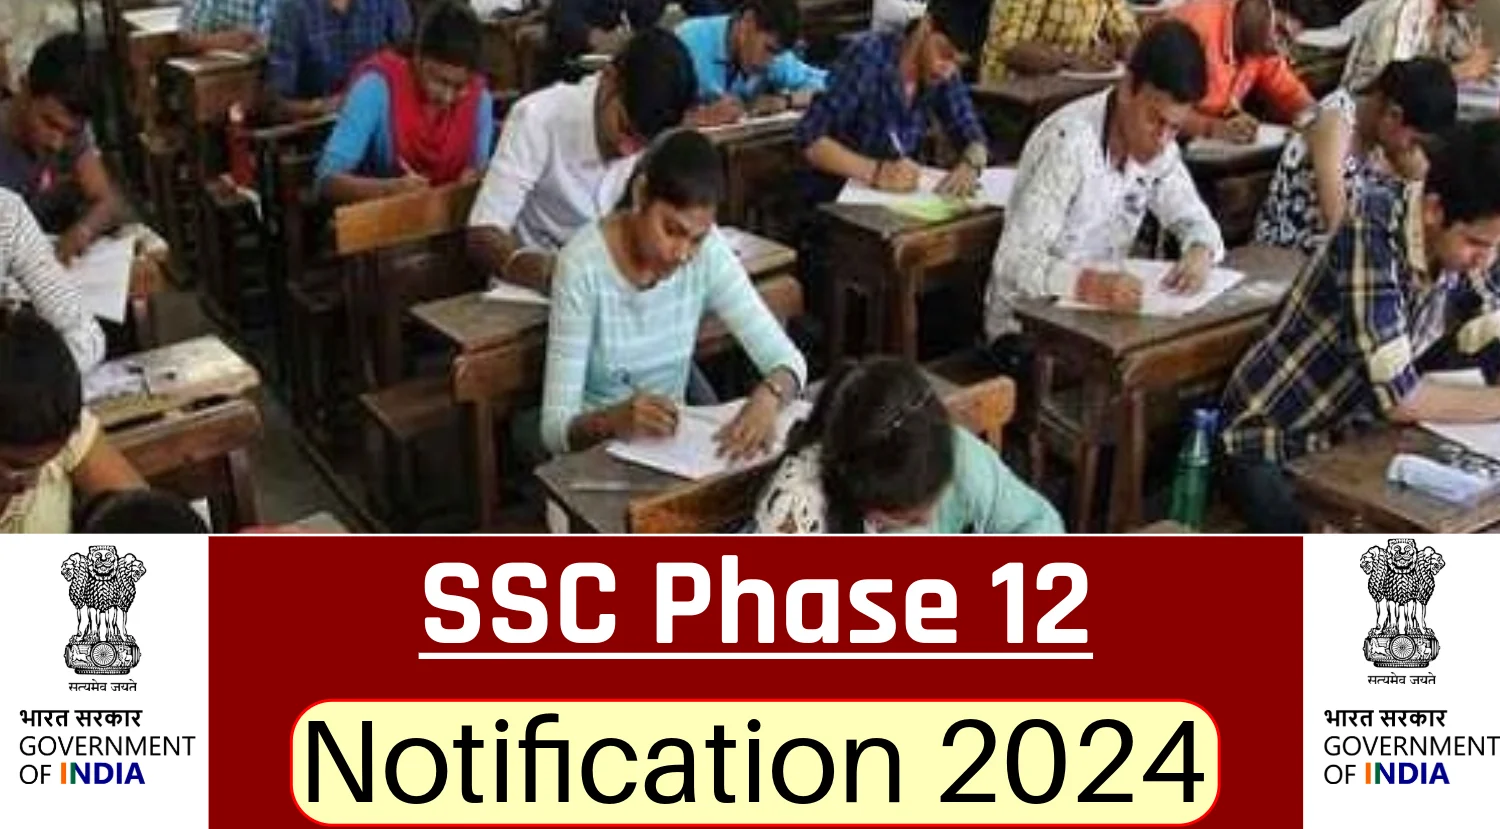 SSC Phase 12 Notification 2024, Check SSC Selection Post Phase XII Eligibility, Exam Pattern, and How to Apply – Karmasandhan